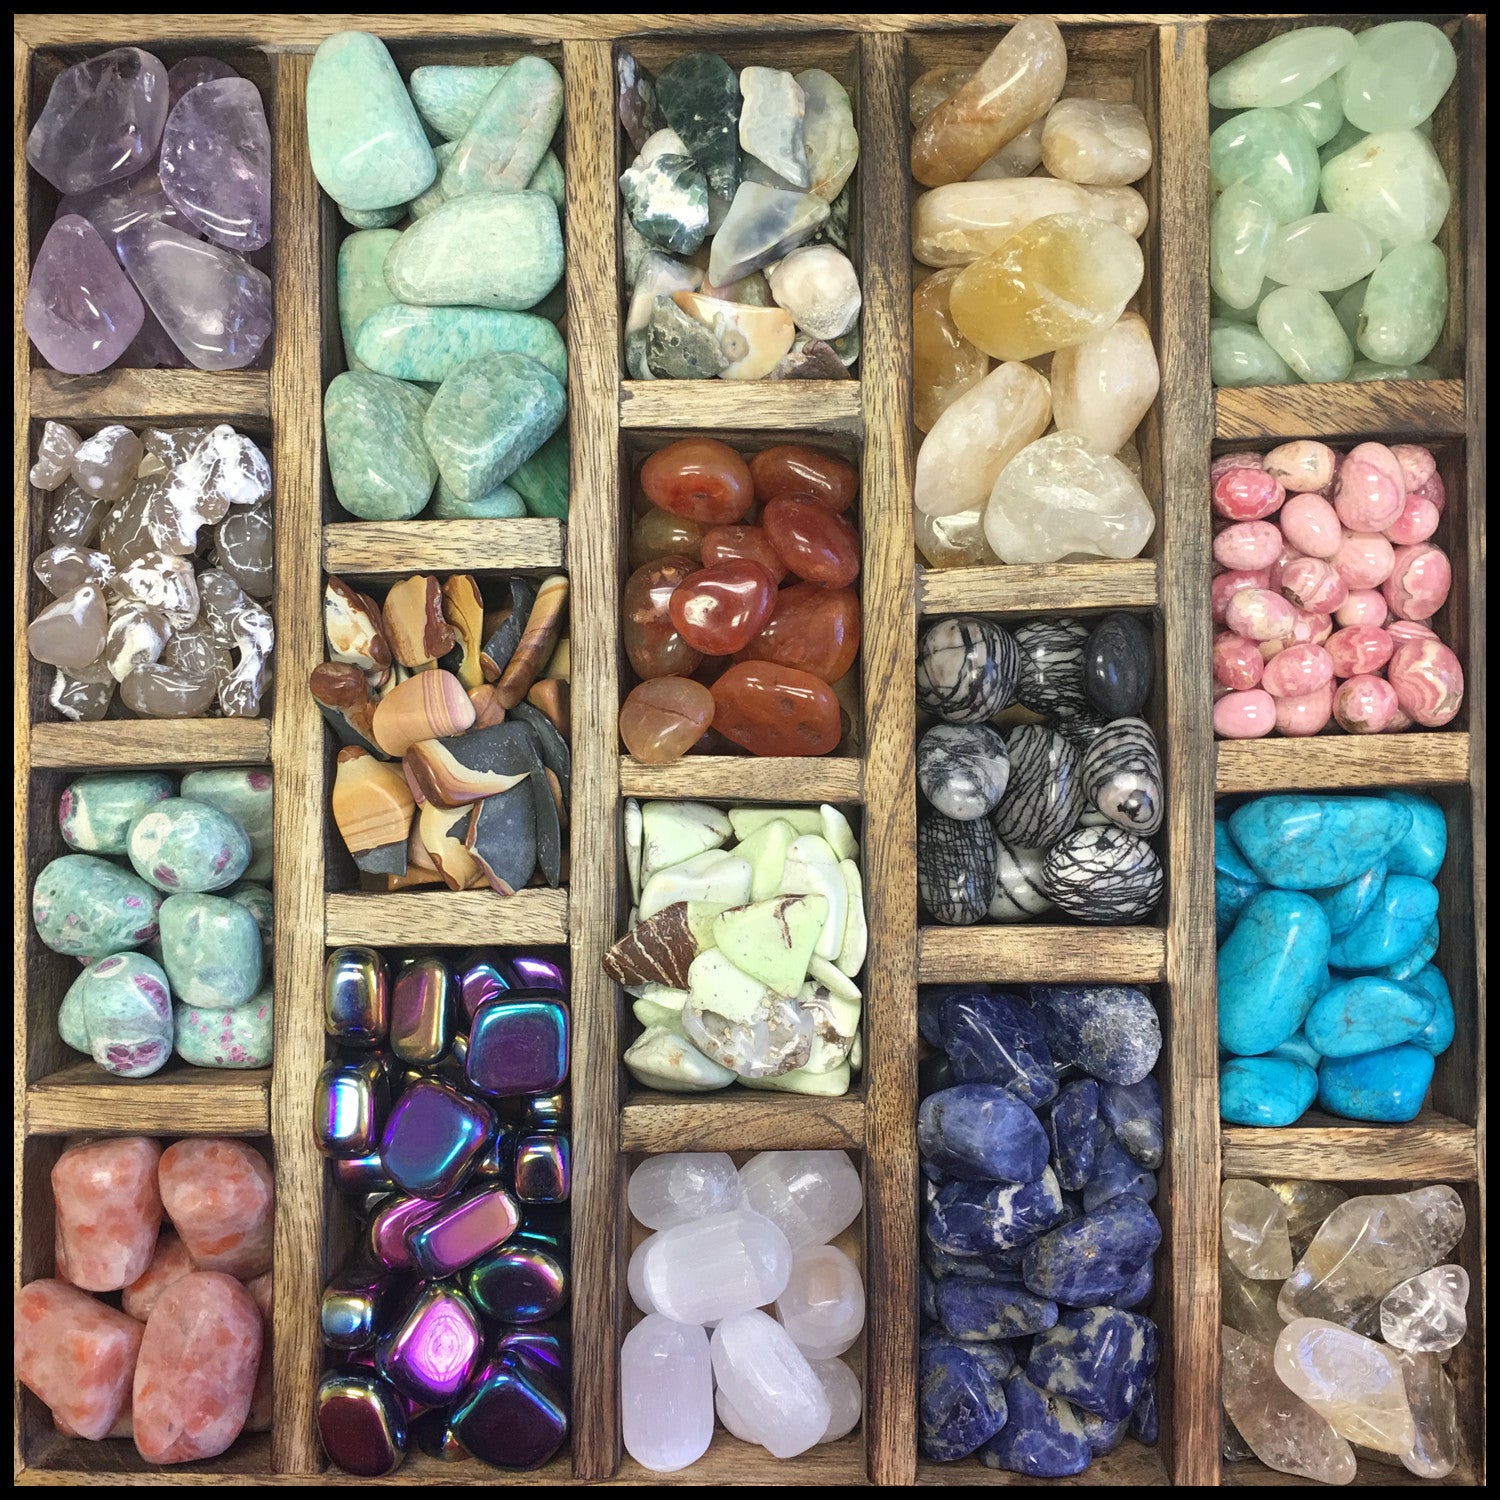 Polished Stones and Crystals Colorful Mix of Small Rocks and Flat